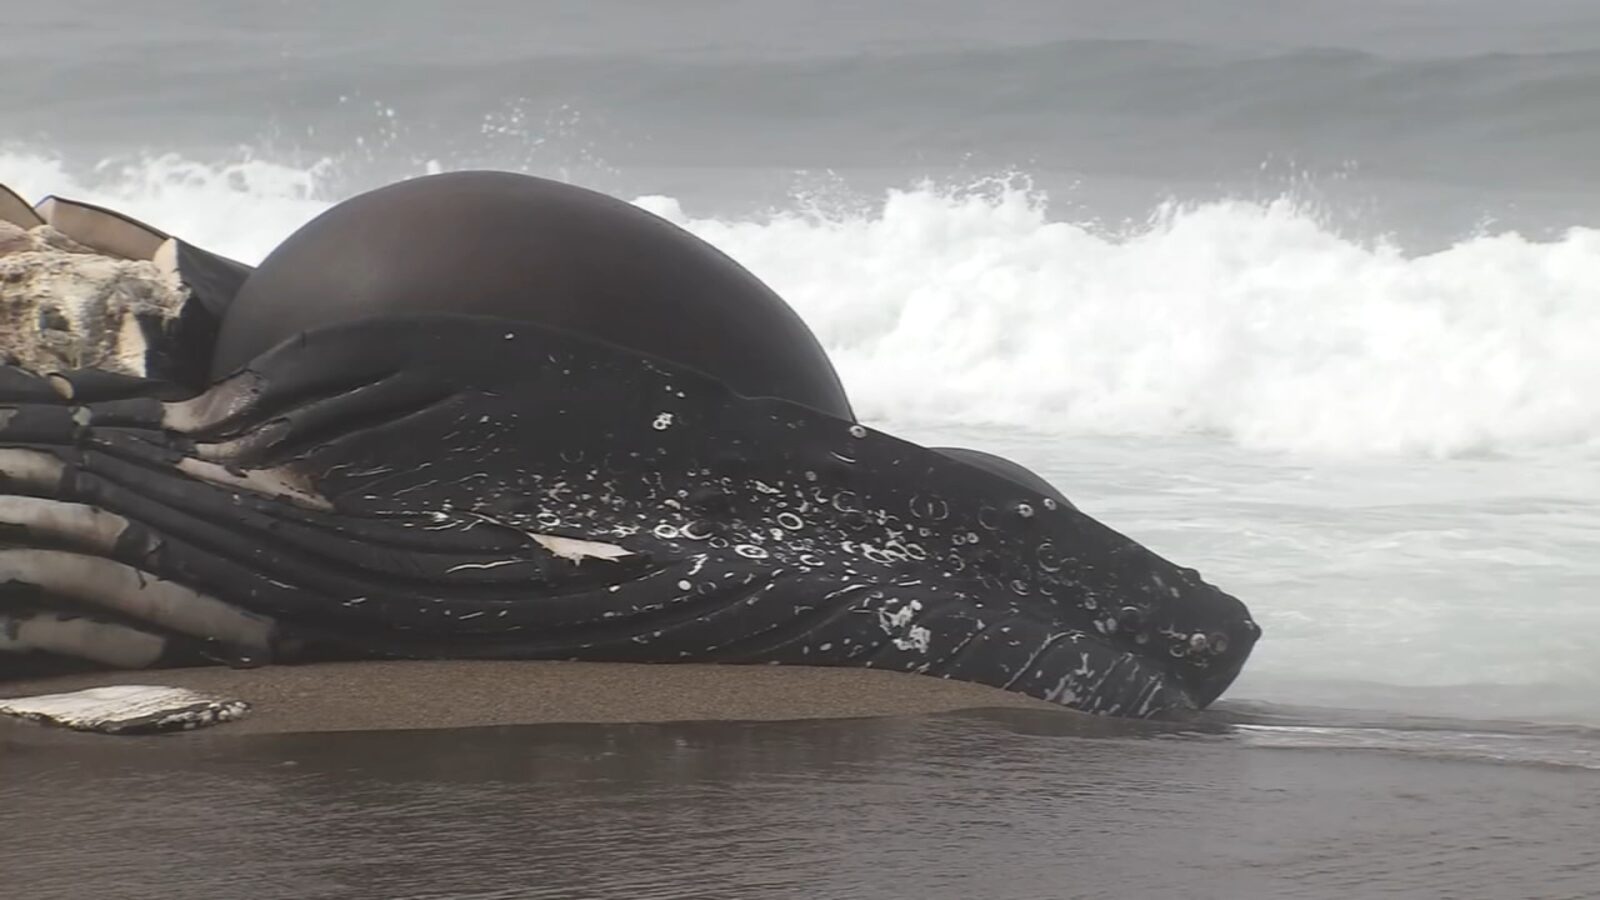 The whale washed ashore Friday between the southern parking lot and the Point Reyes Lighthouse.